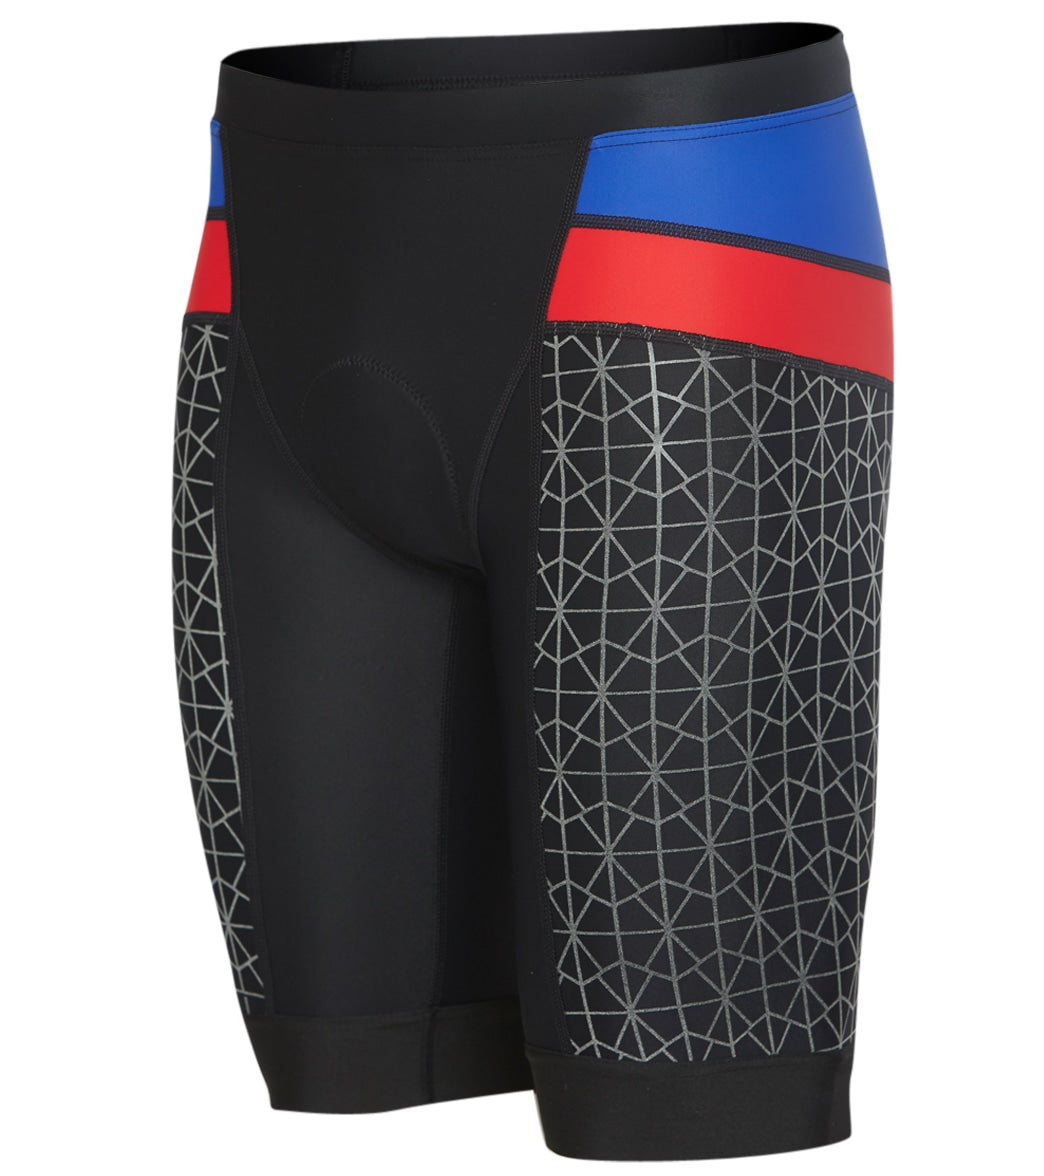 TYR Men's 9 Competitor Tri Short - Black/Blue/Red Small Size Small - Swimoutlet.com